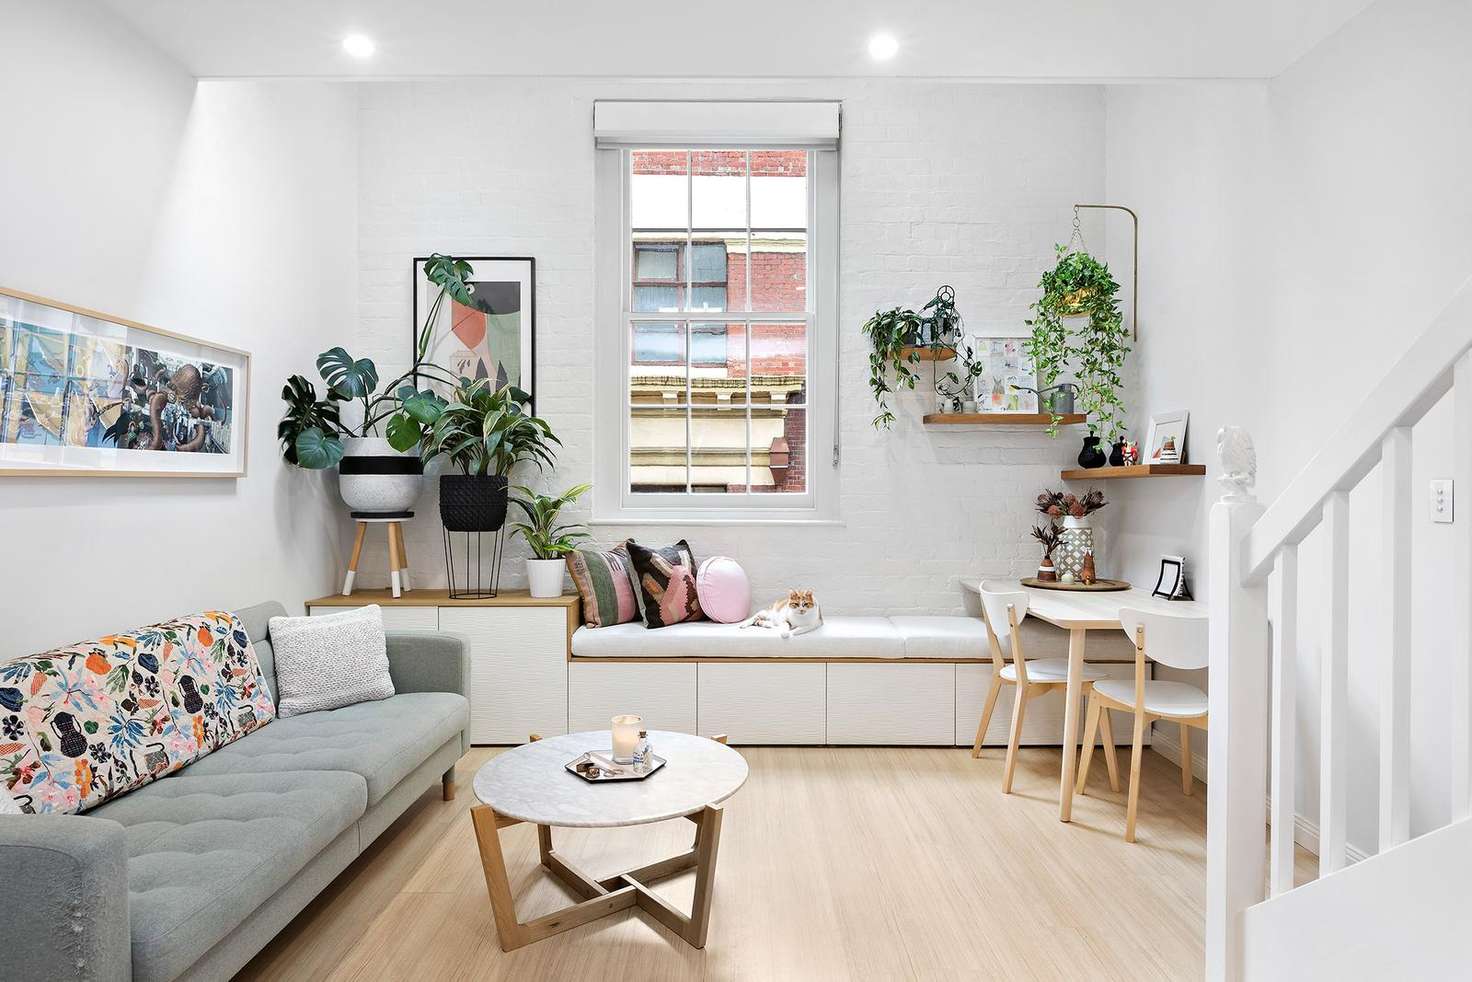 Main view of Homely apartment listing, 16/79-81 Franklin Street, Melbourne VIC 3000